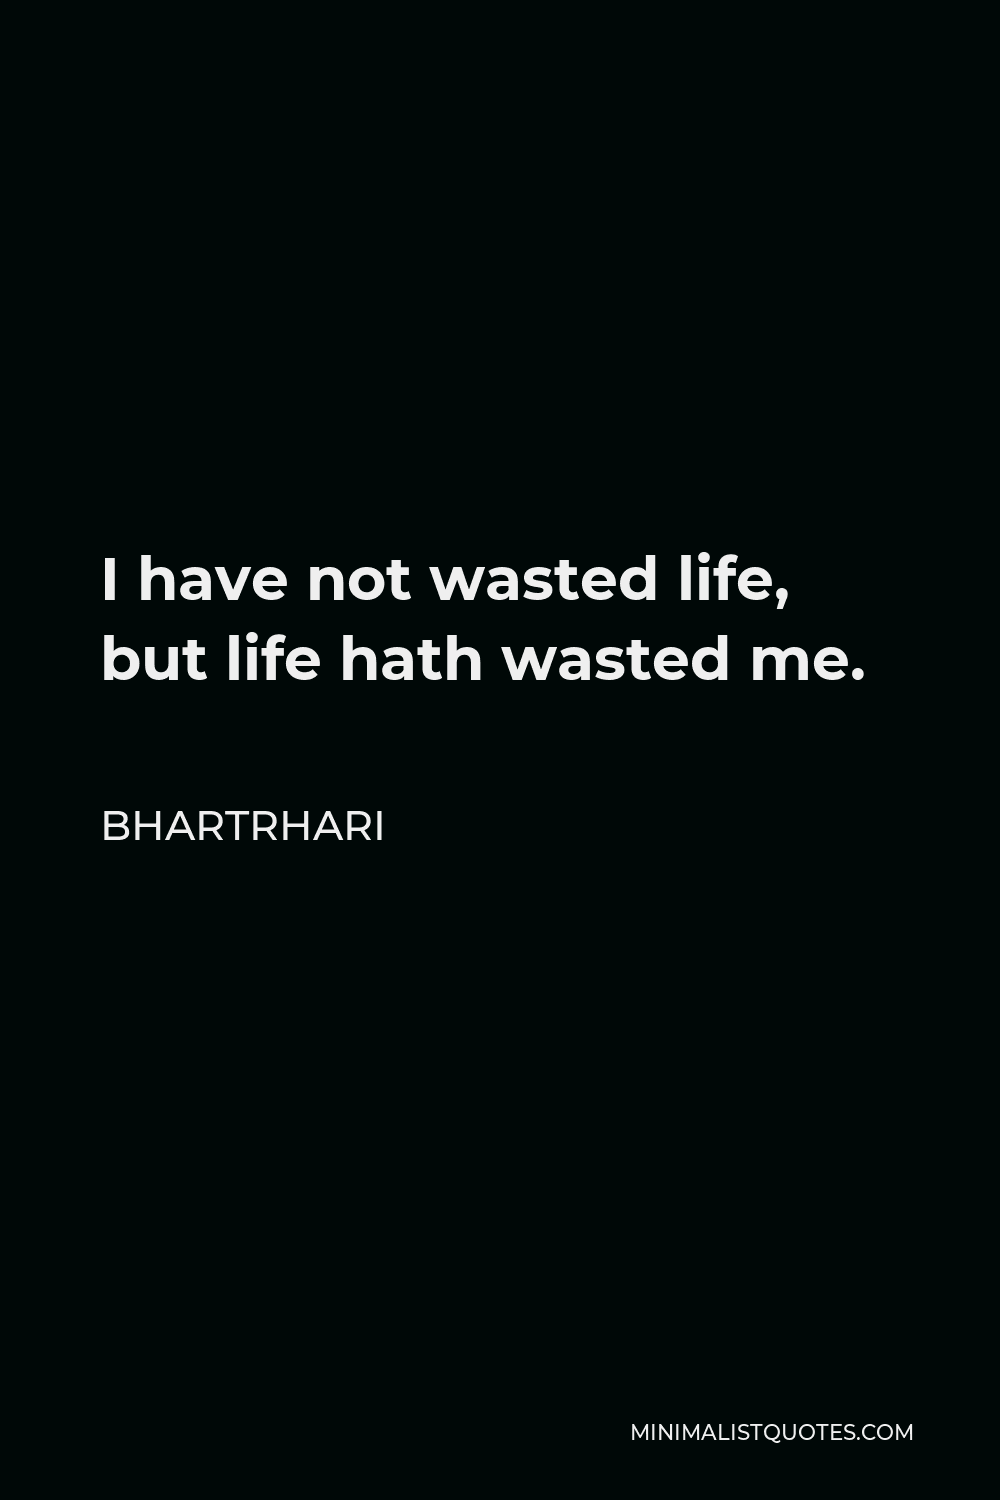 Bhartrhari Quote - I have not wasted life, but life hath wasted me.